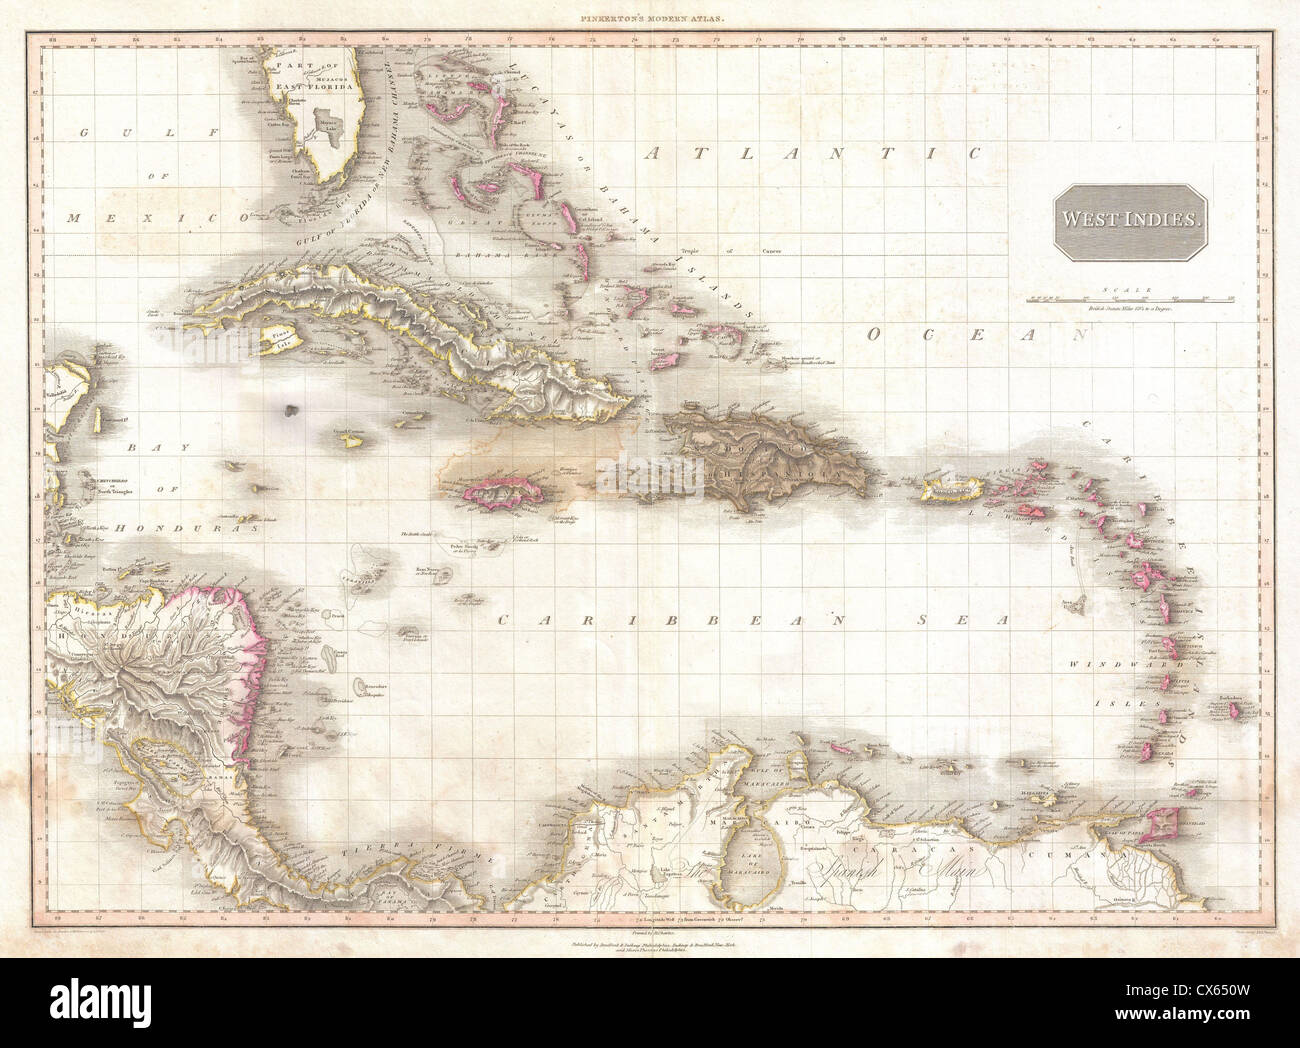 1818 Pinkerton Map of the West Indies, Antilles, and Caribbean Sea Stock Photo